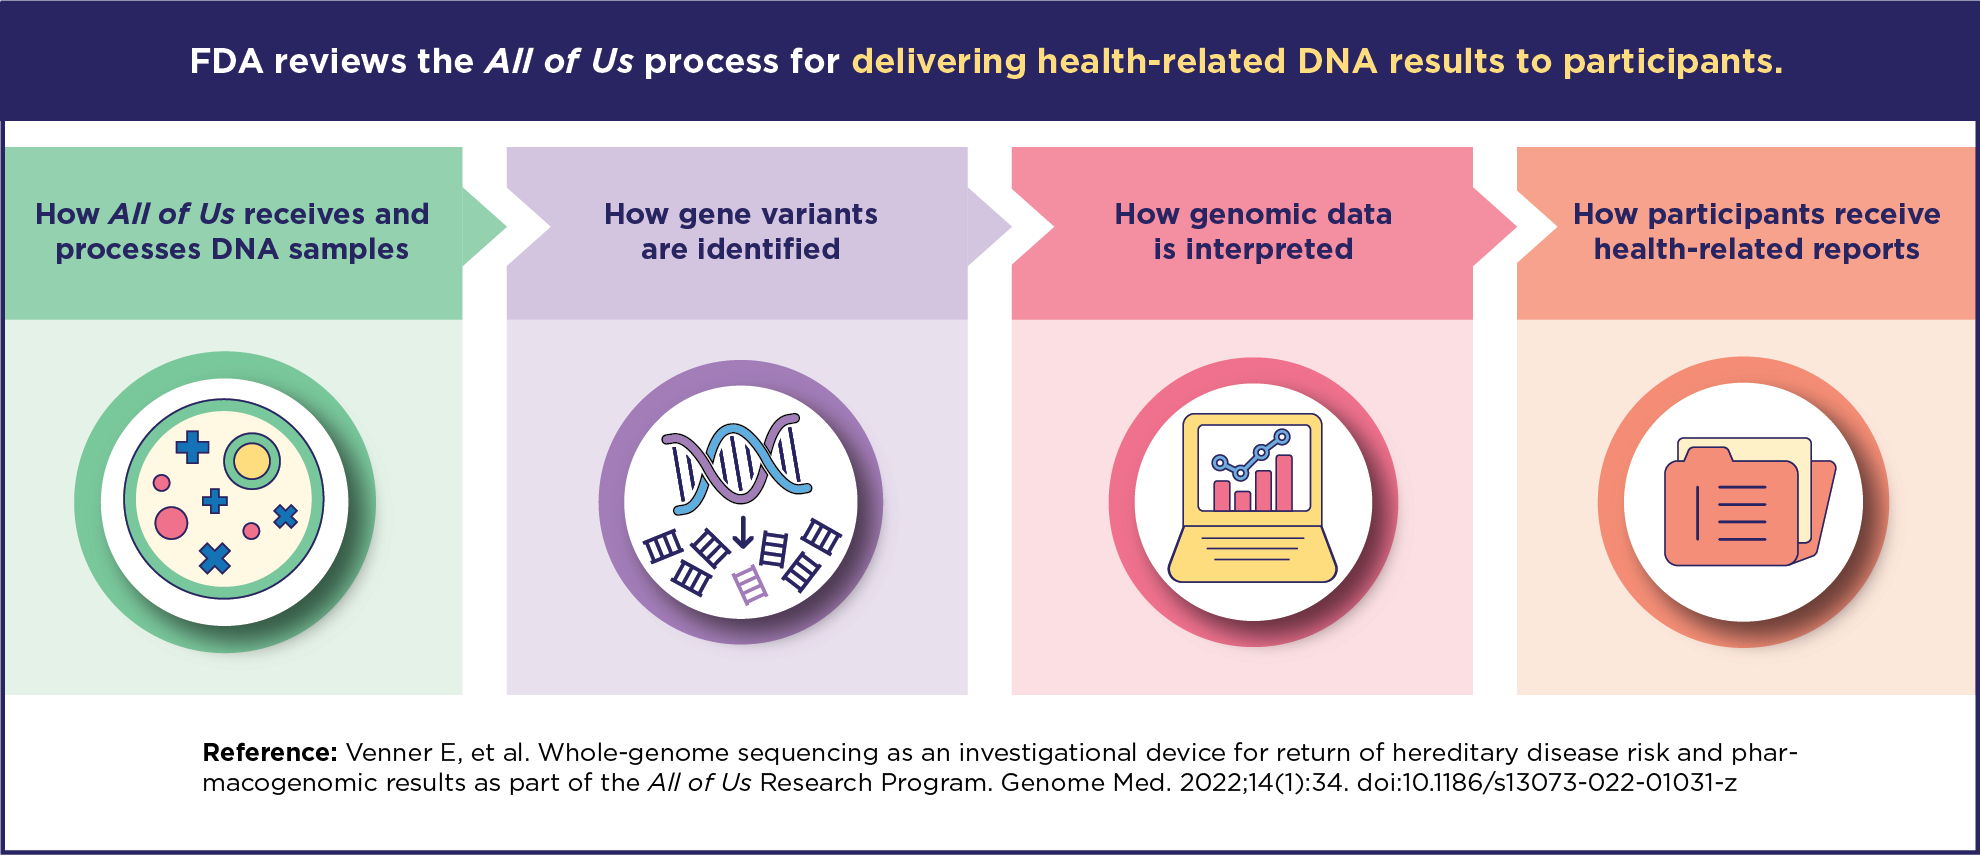 Process diagram, titled 'FDA reviews and tests the All of Us process for delivering health-related DNA results to participants.' Process: 'How All of Us receives and processes DNA samples' ,'How gene variants are identified', 'How genomic data is interpreted', 'How participants receive health-related reports'. Reference: Venner E. et al. Whole-genome sequencing as an investigational device for return of hereditary disease risk and pharmacogenomic results as part of the All of us Research Program